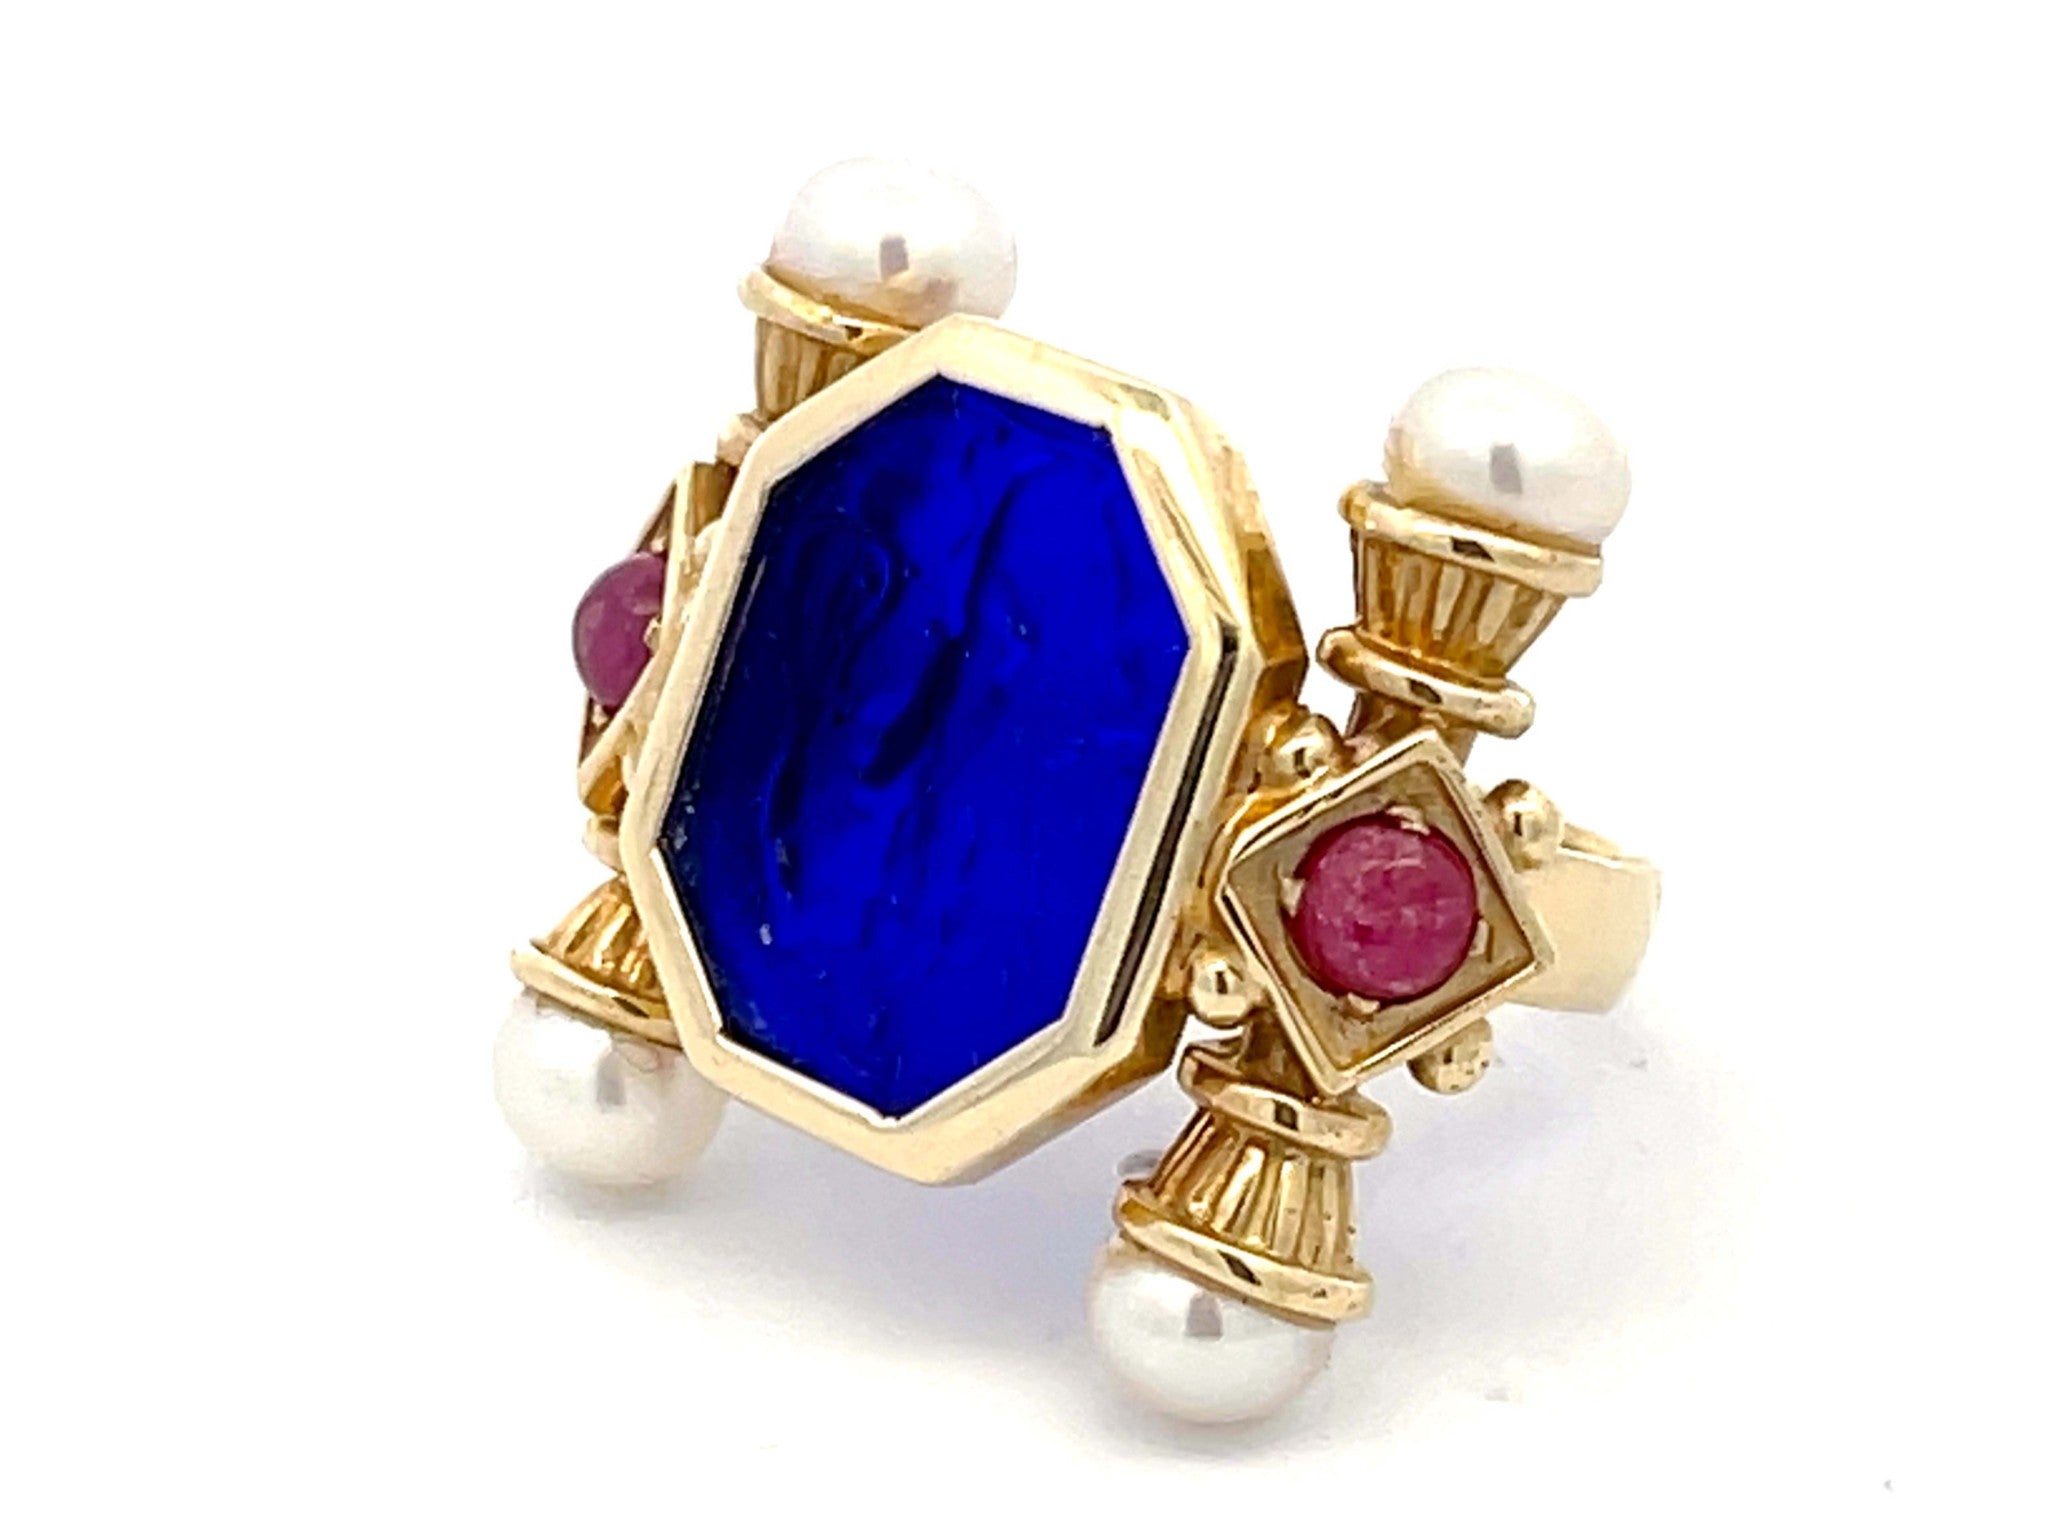 Large Vintage Blue Glass Cameo Ruby and Pearl Ring in 14k Yellow Gold